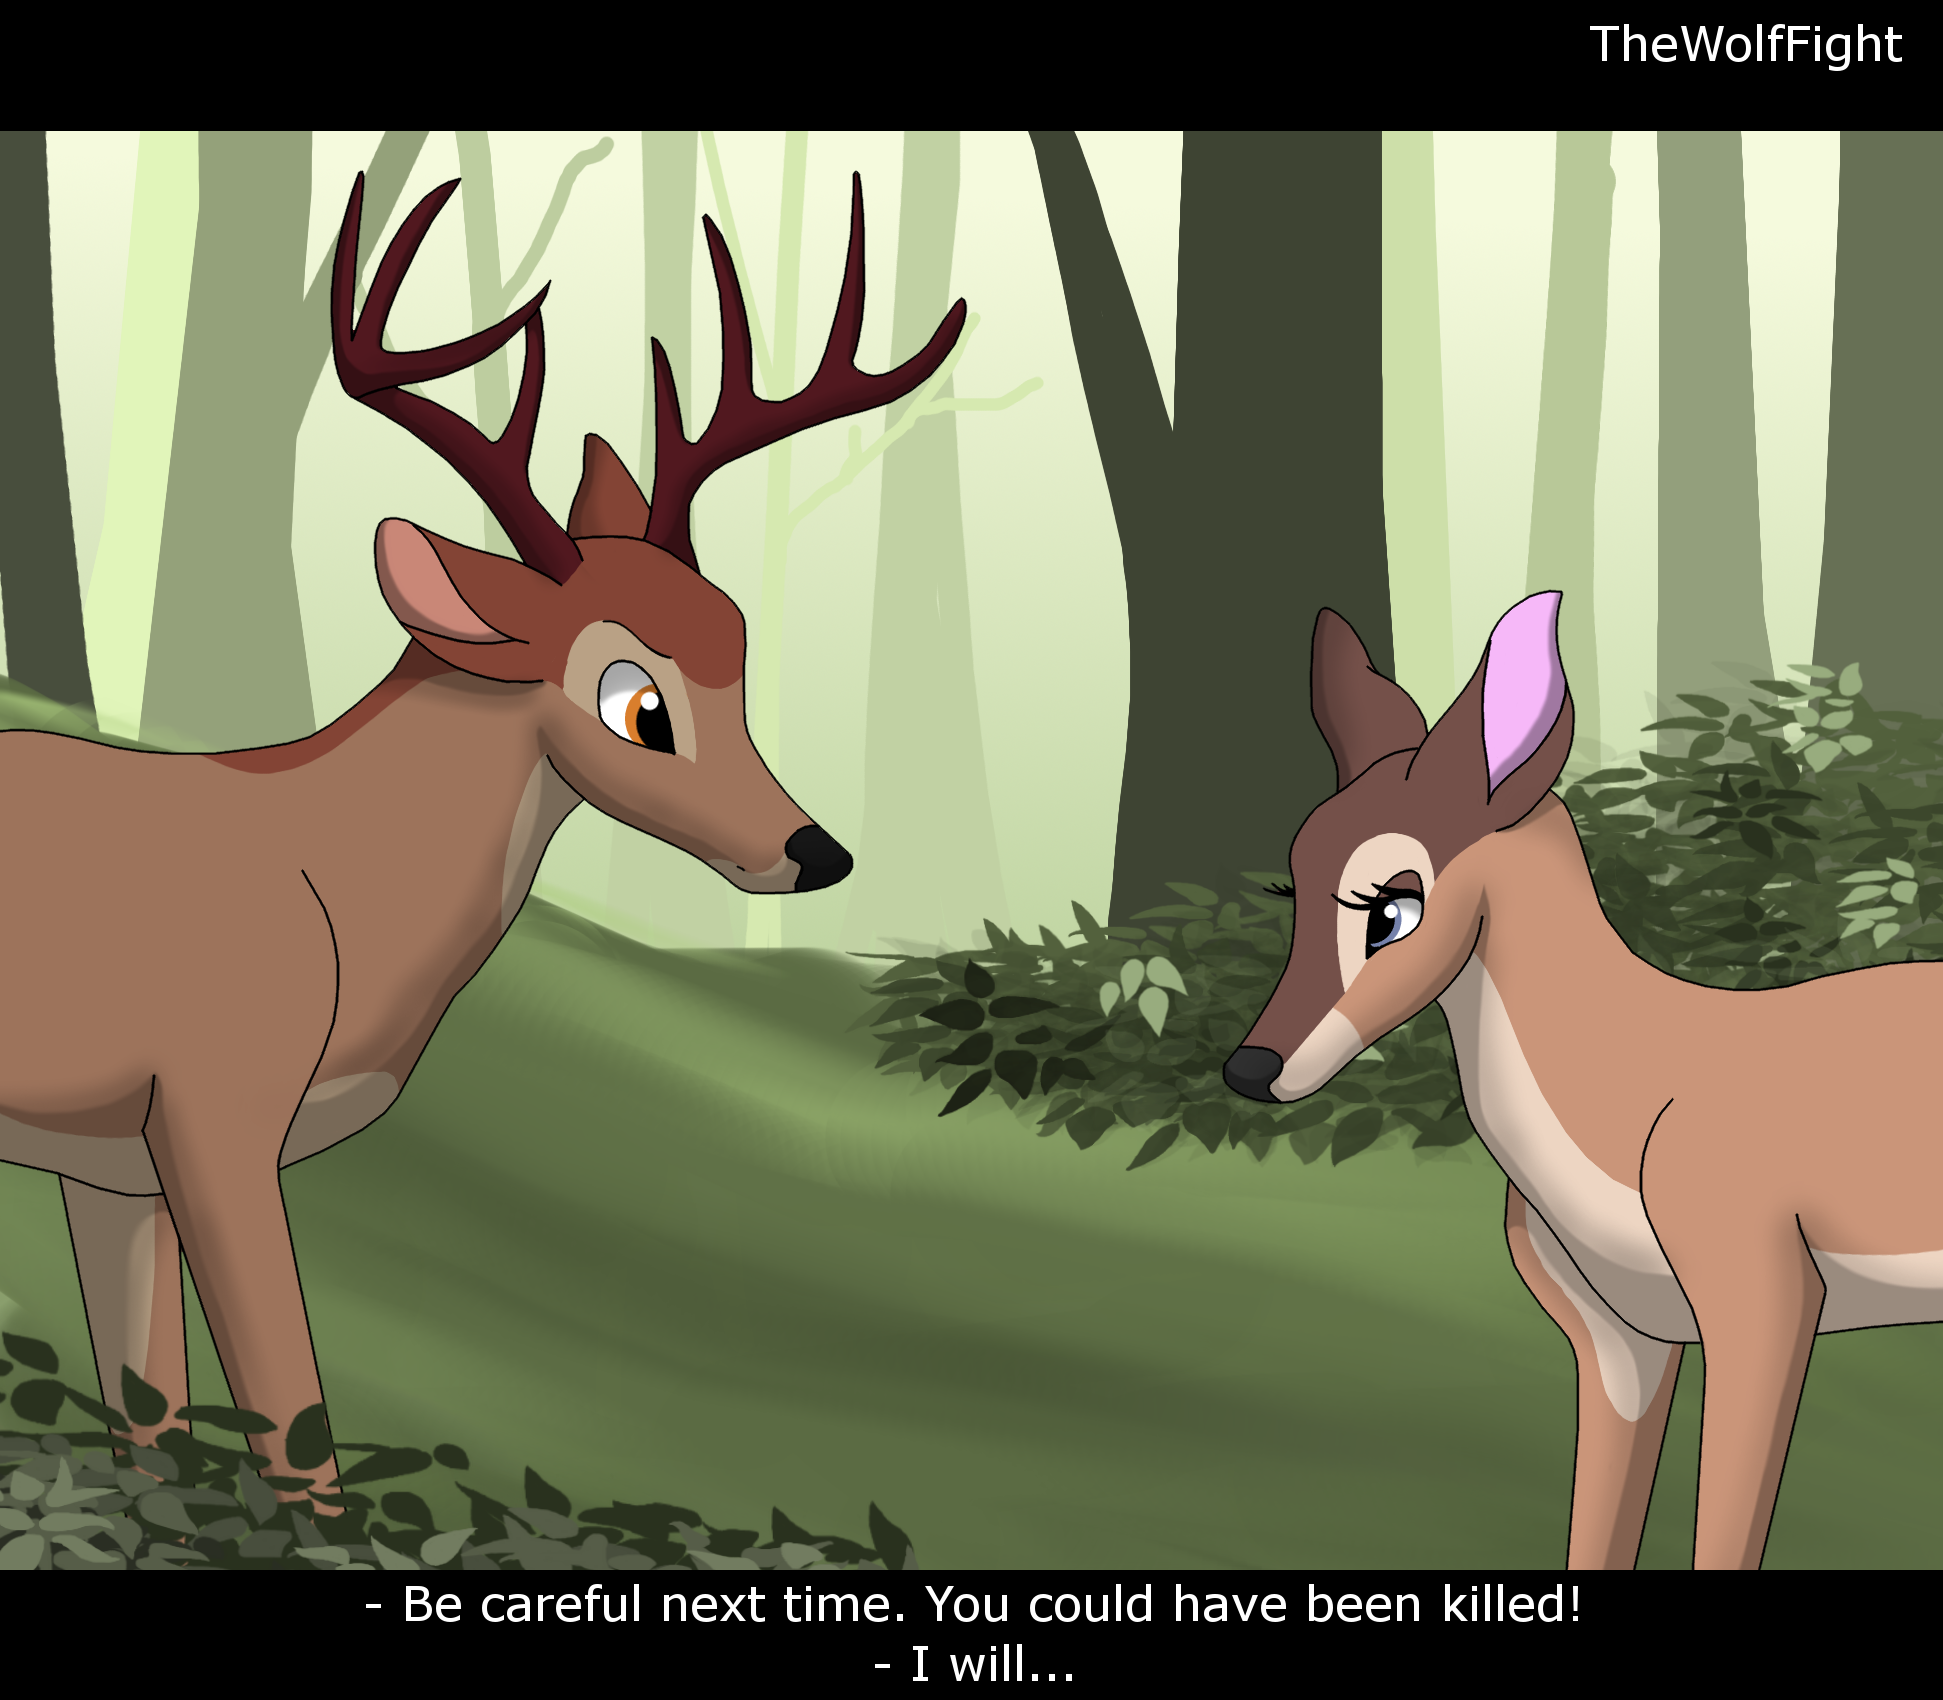 In bambi doe Who was